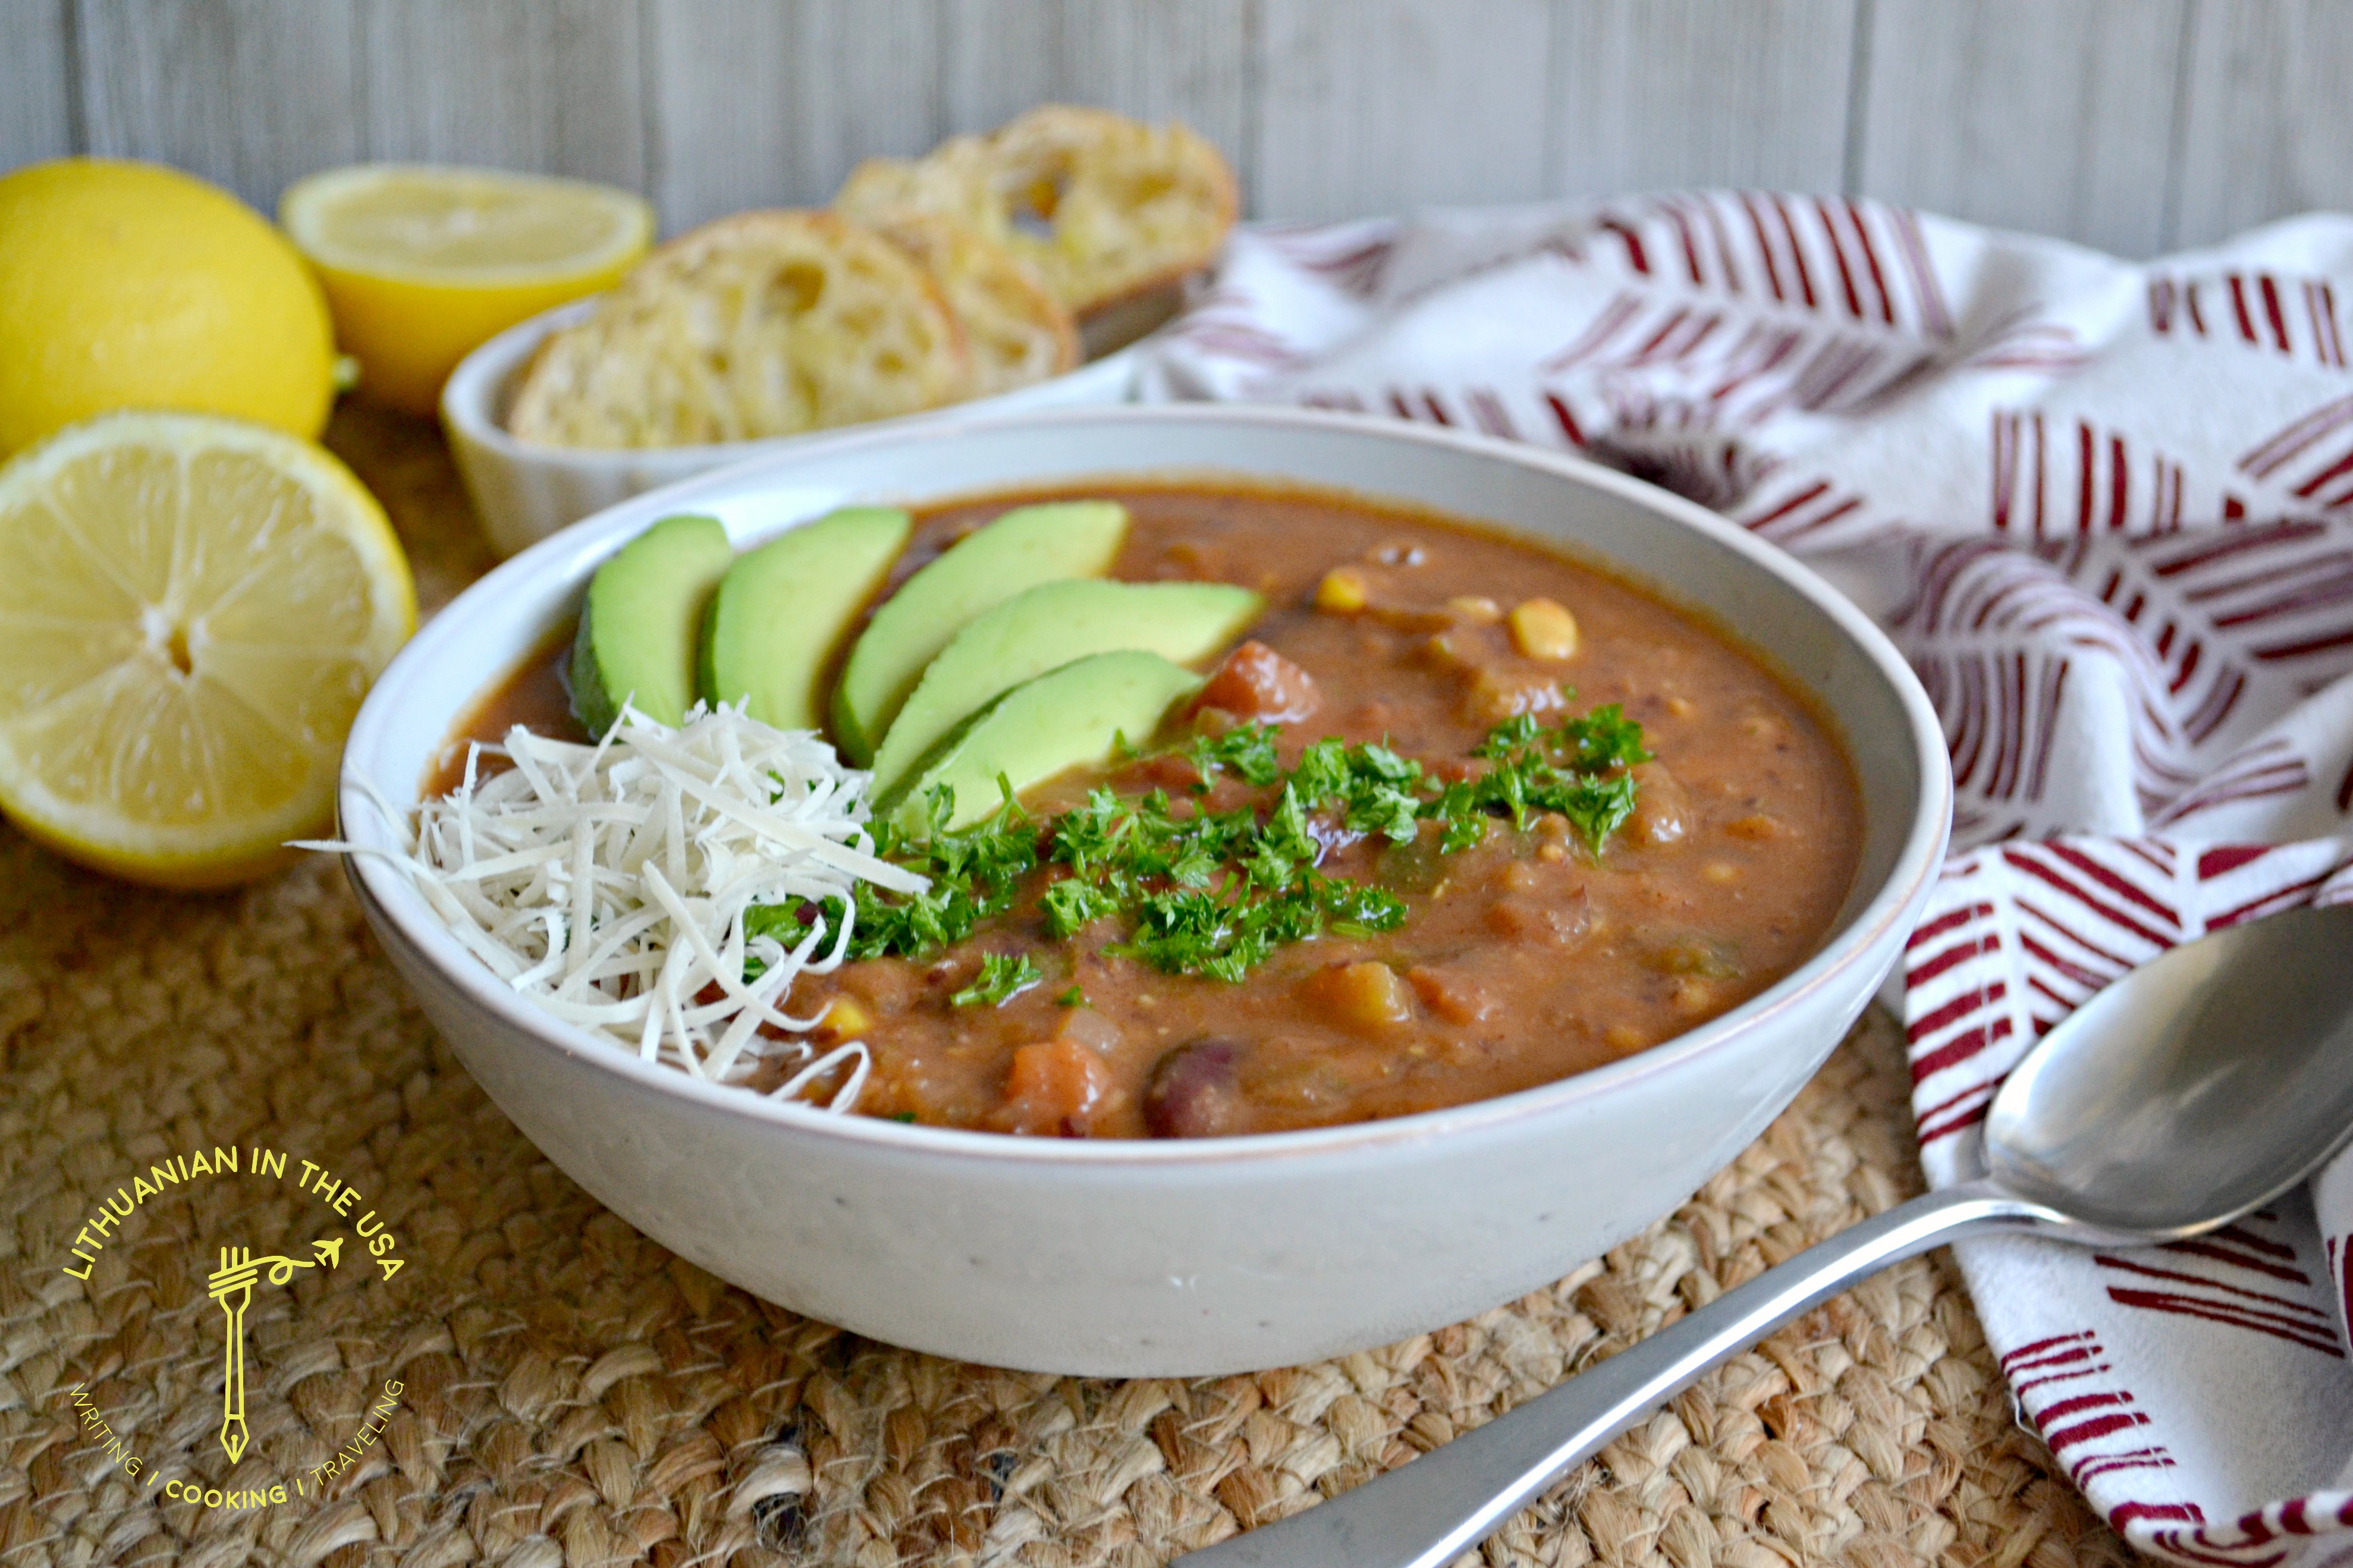 Easy and Delicious Vegetarian Chili